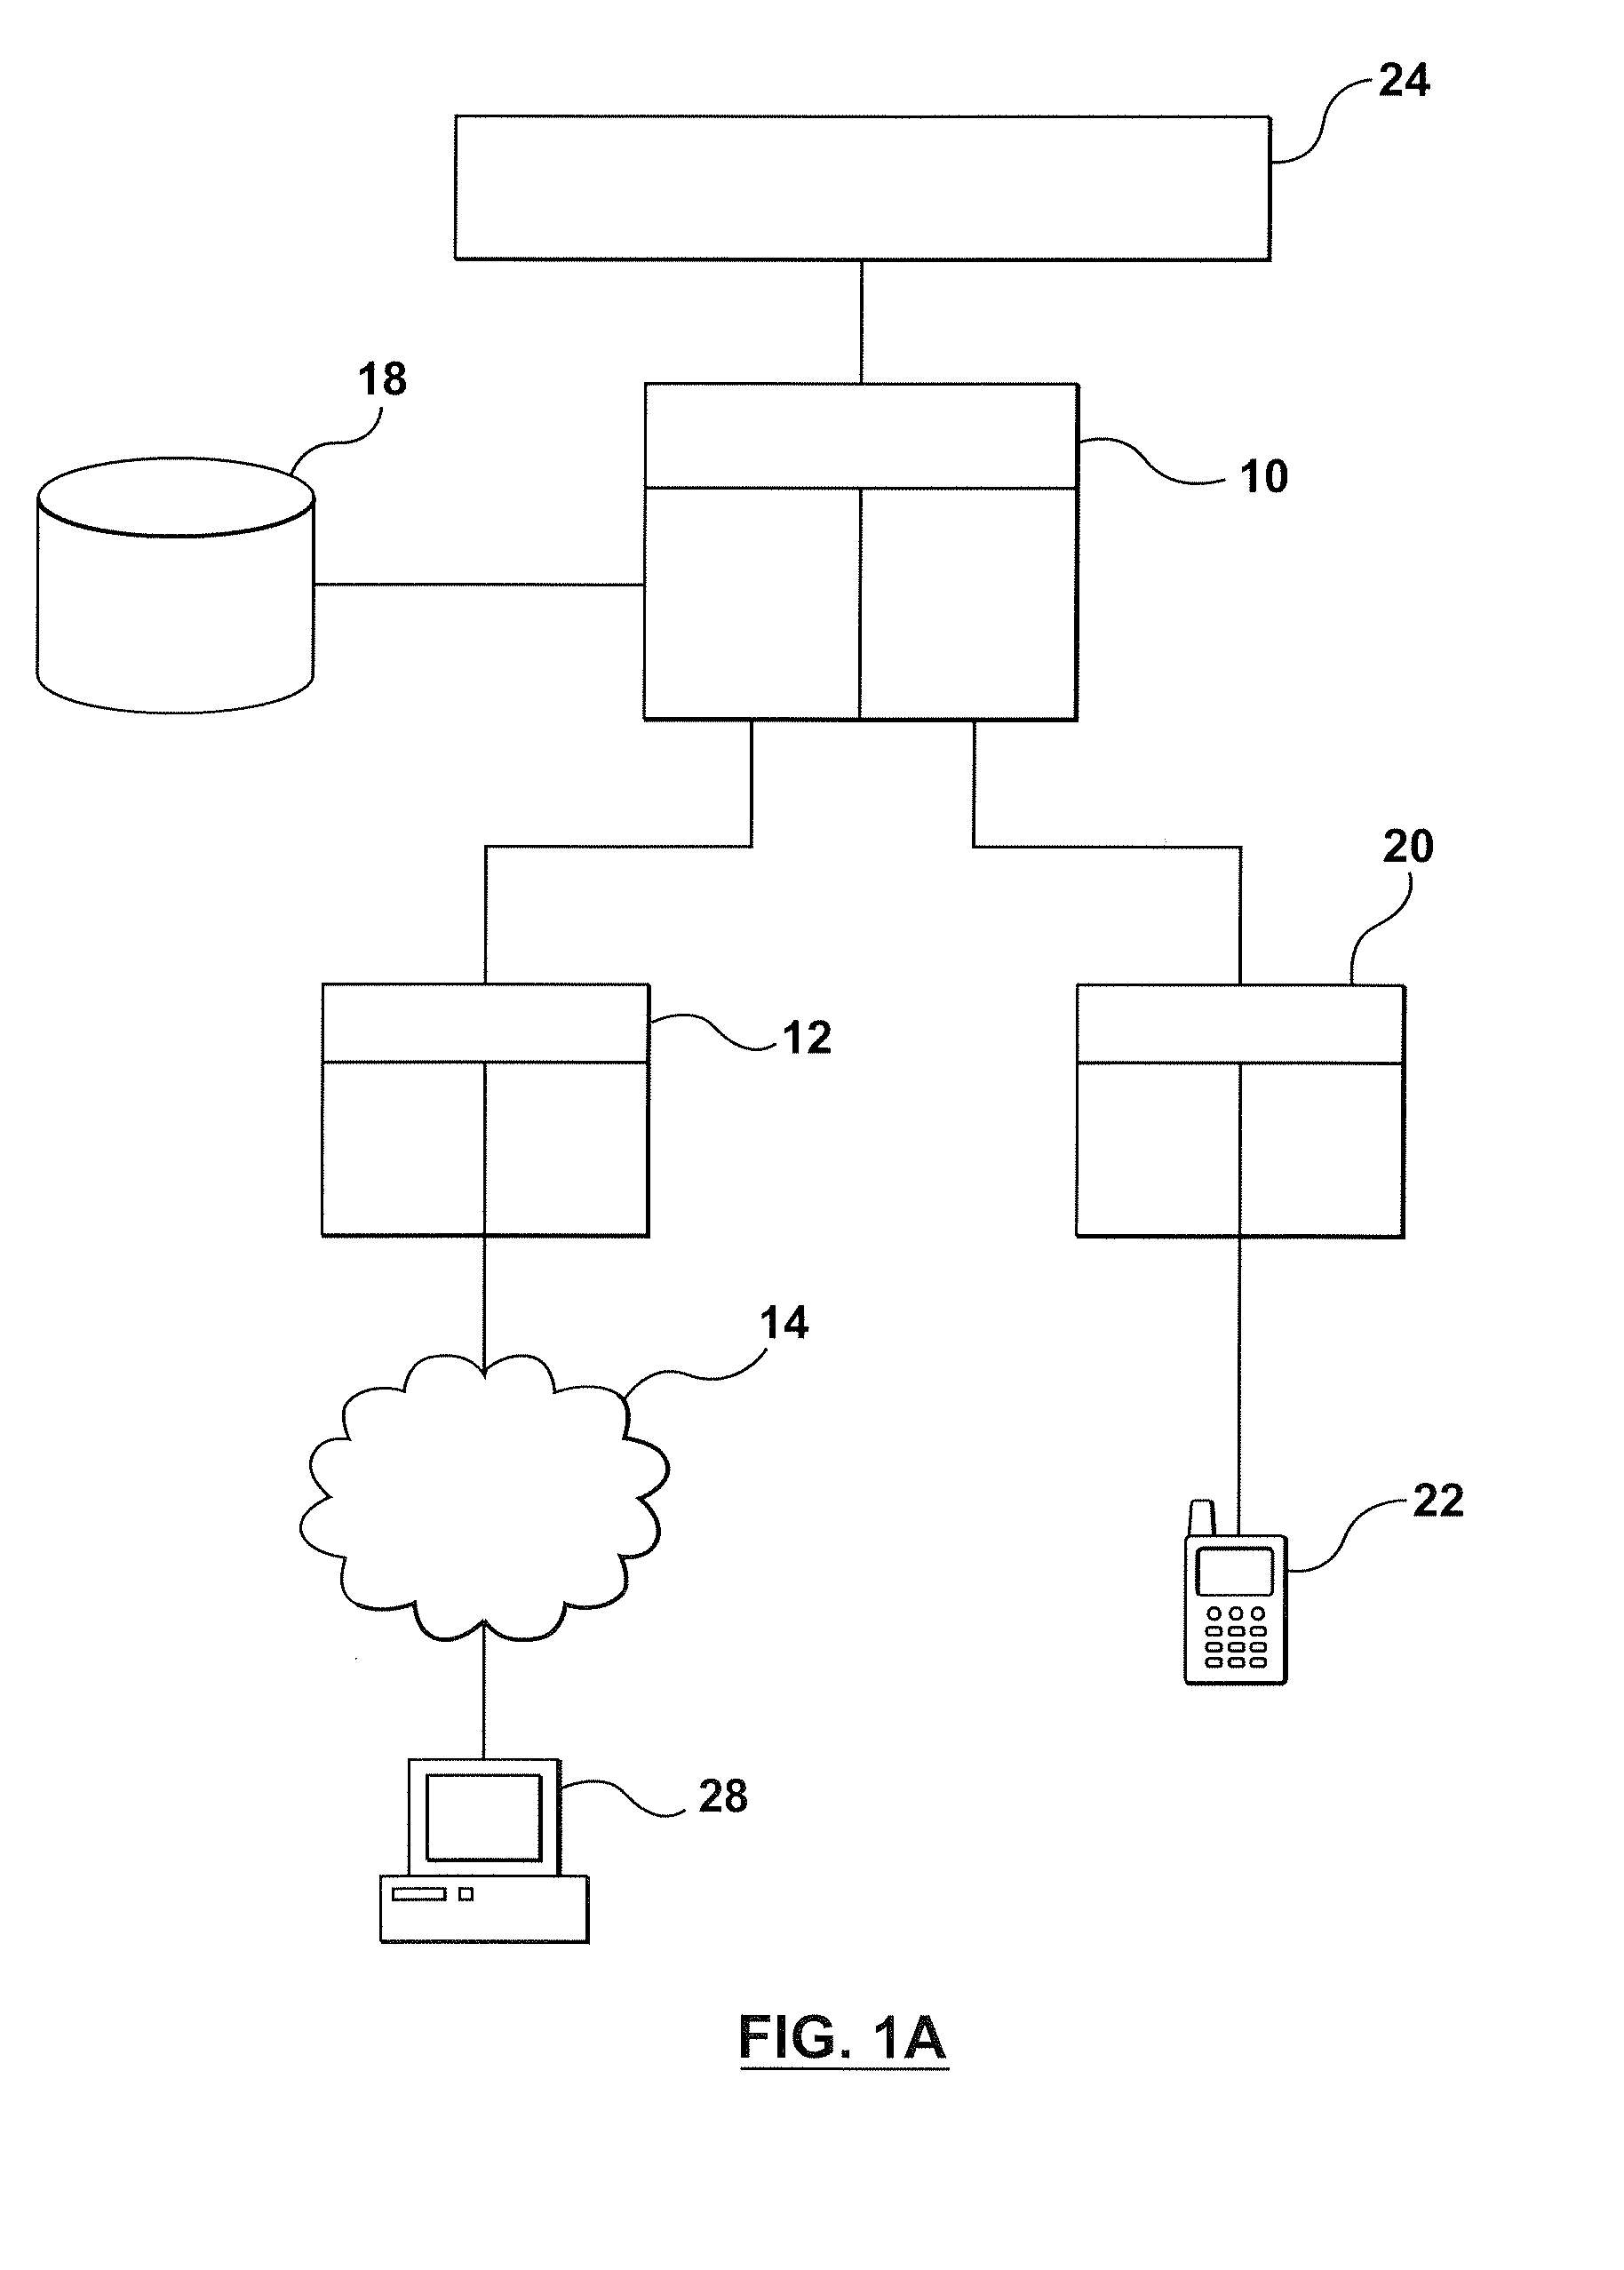 Mobile self-management compliance and notification method, system and computer program product